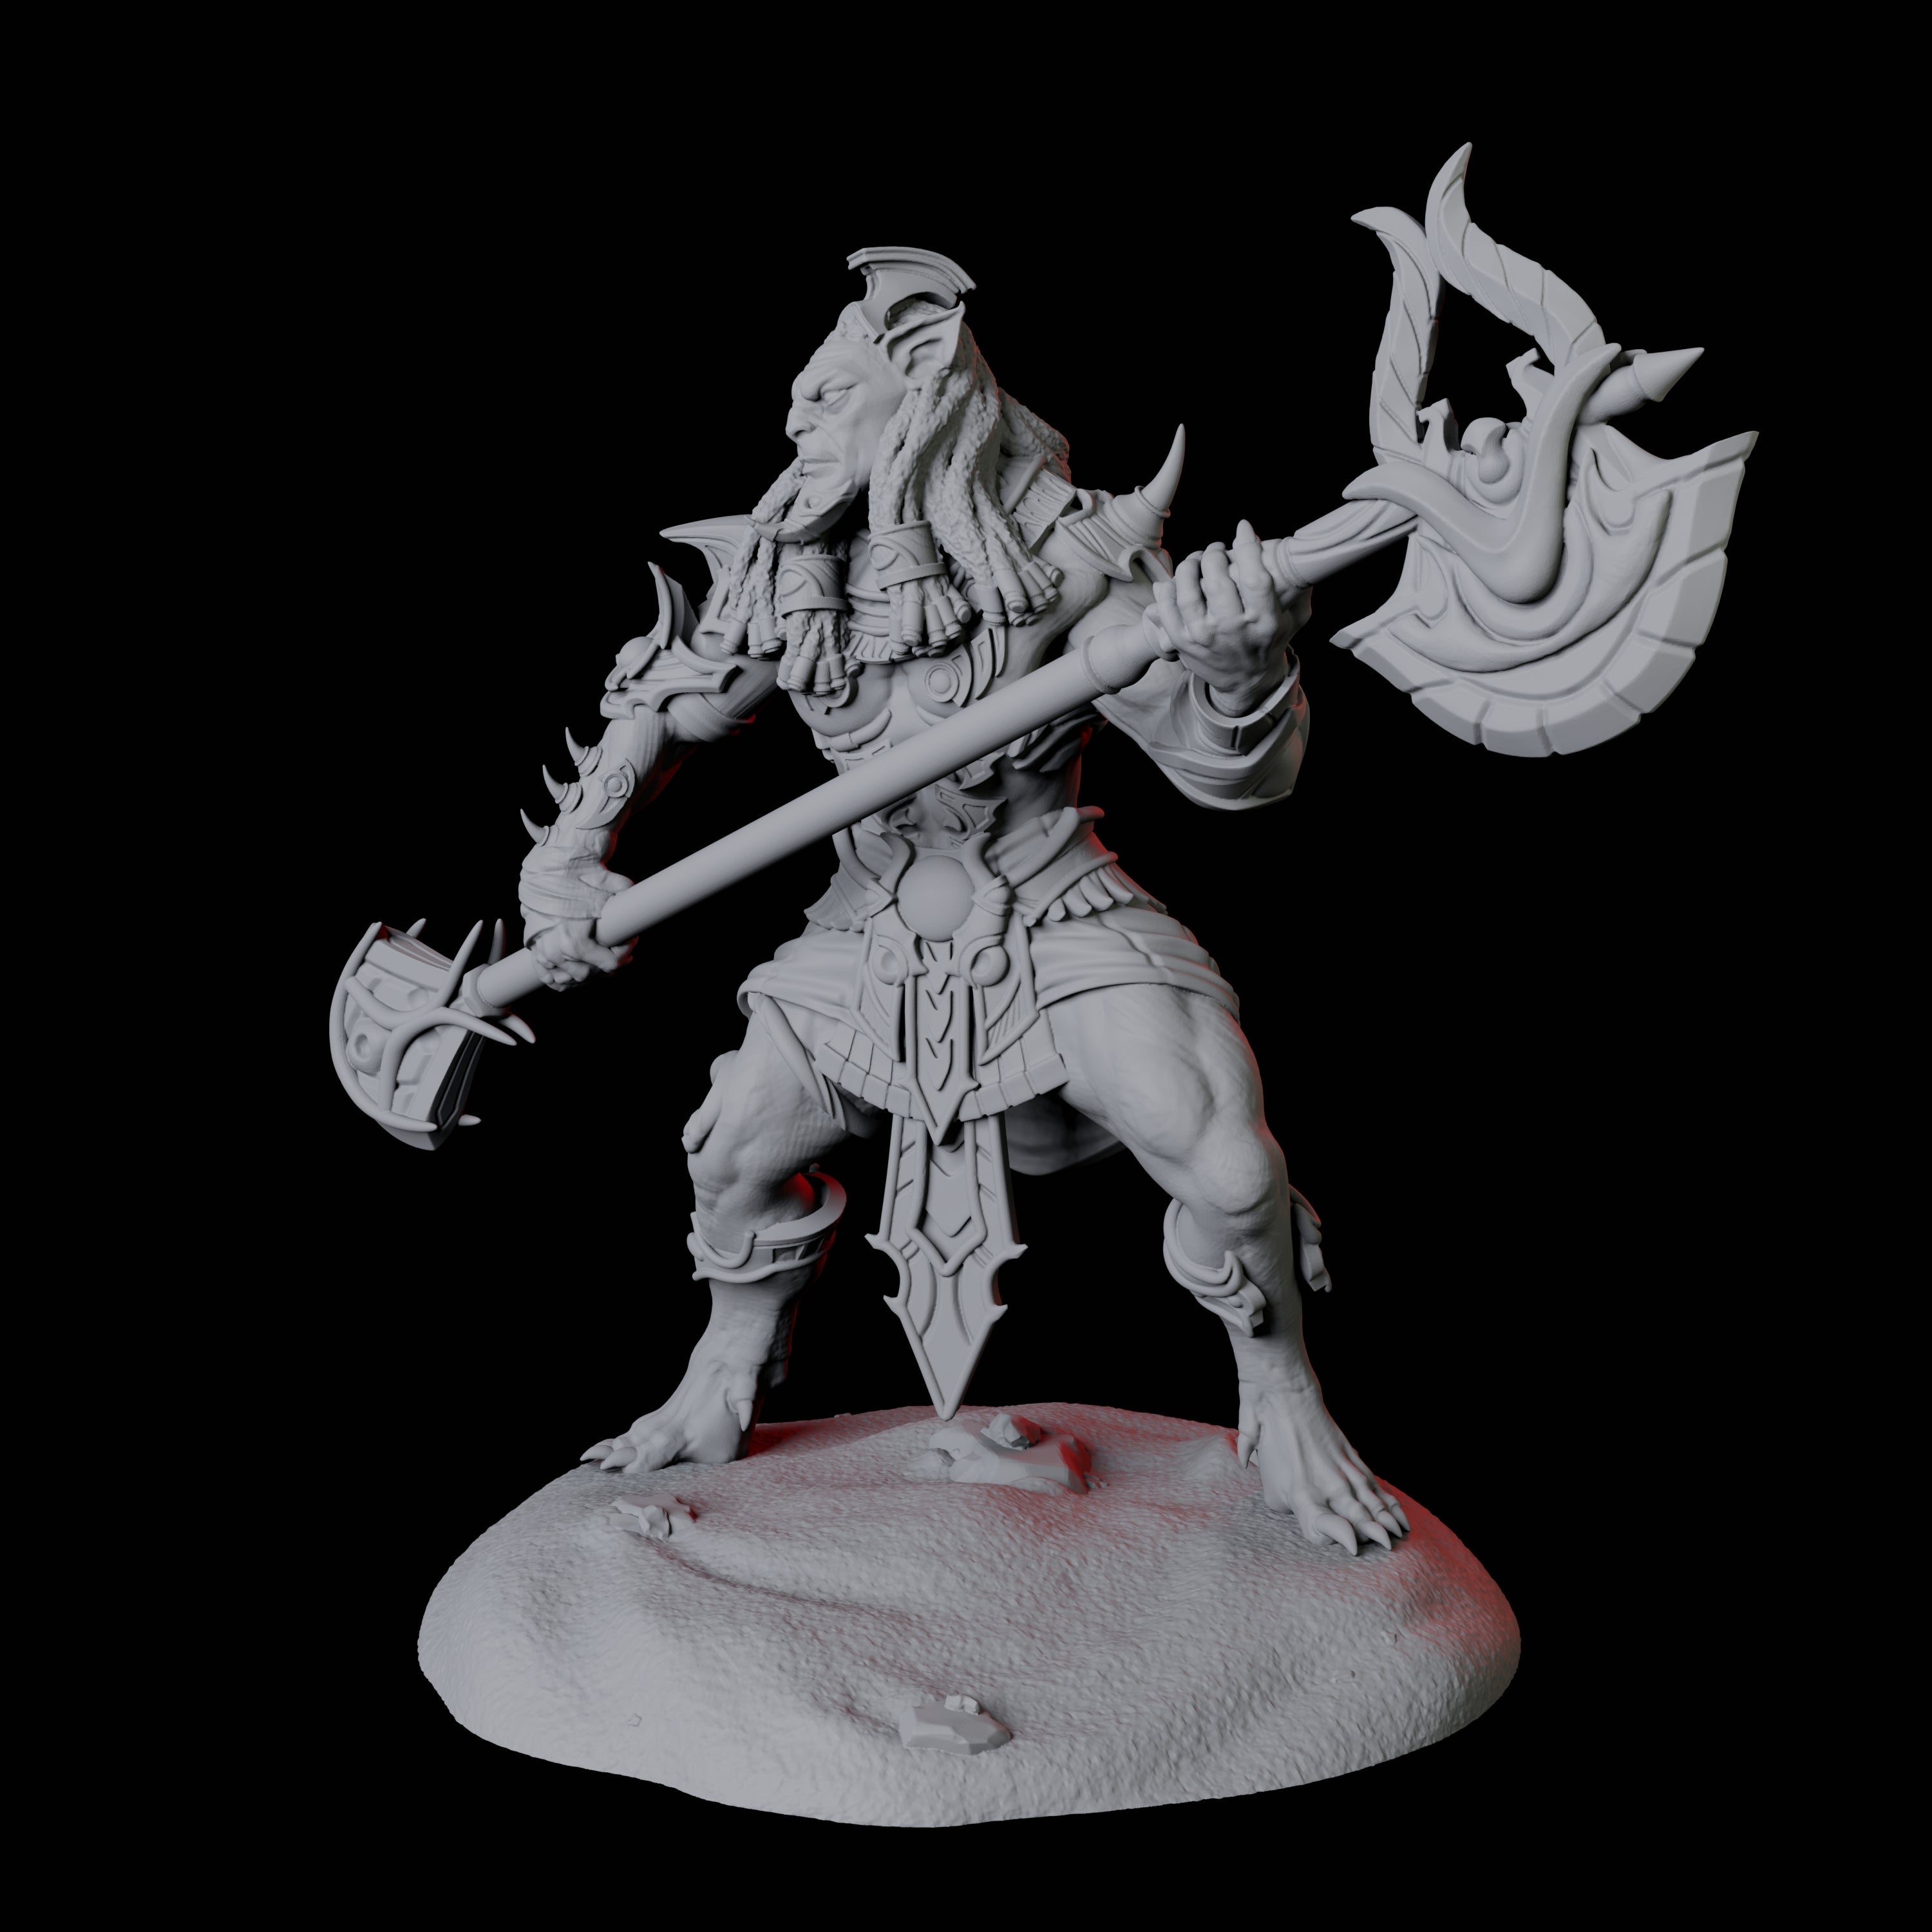 Powerful Tabaxi Warrior C Miniature for Dungeons and Dragons, Pathfinder or other TTRPGs